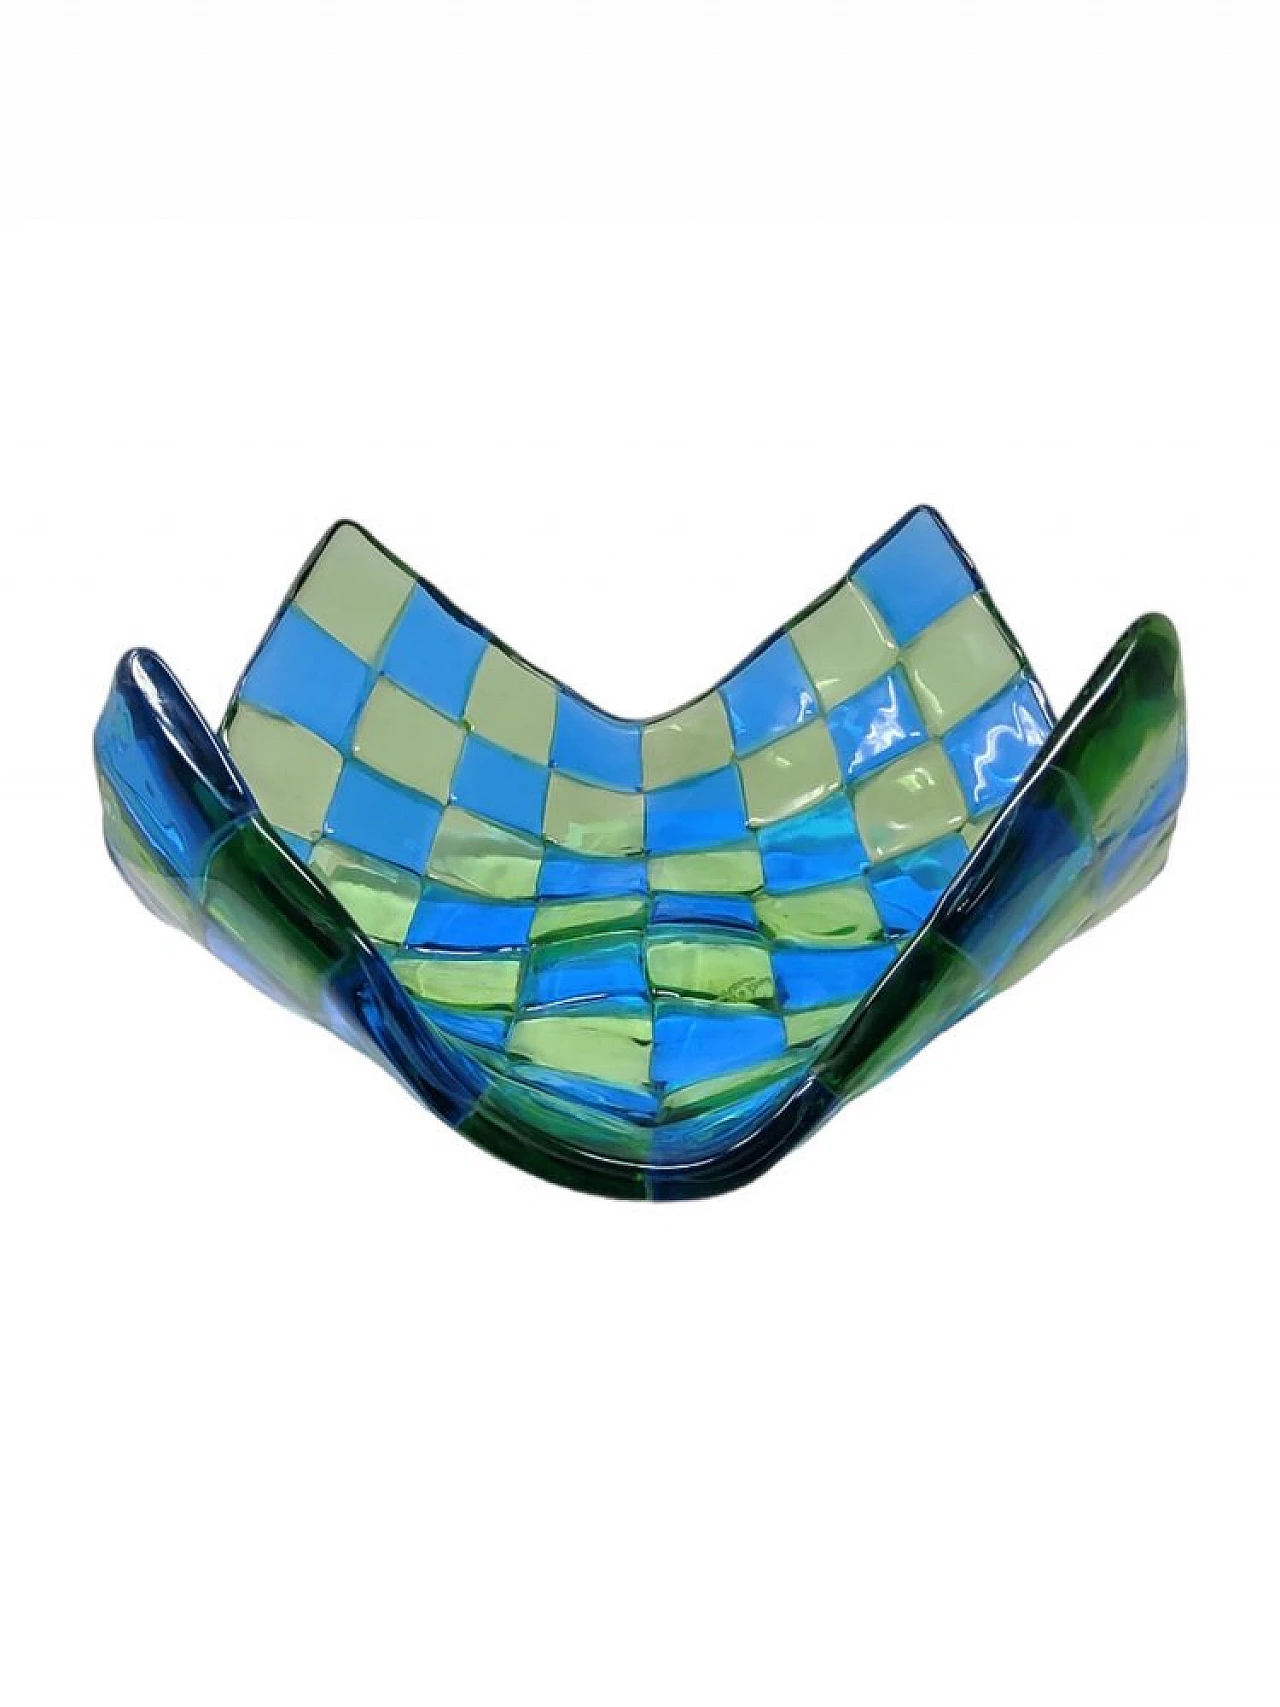 Checkered emptying tray in Murano glass by Barovier and Donà, 1990s 1